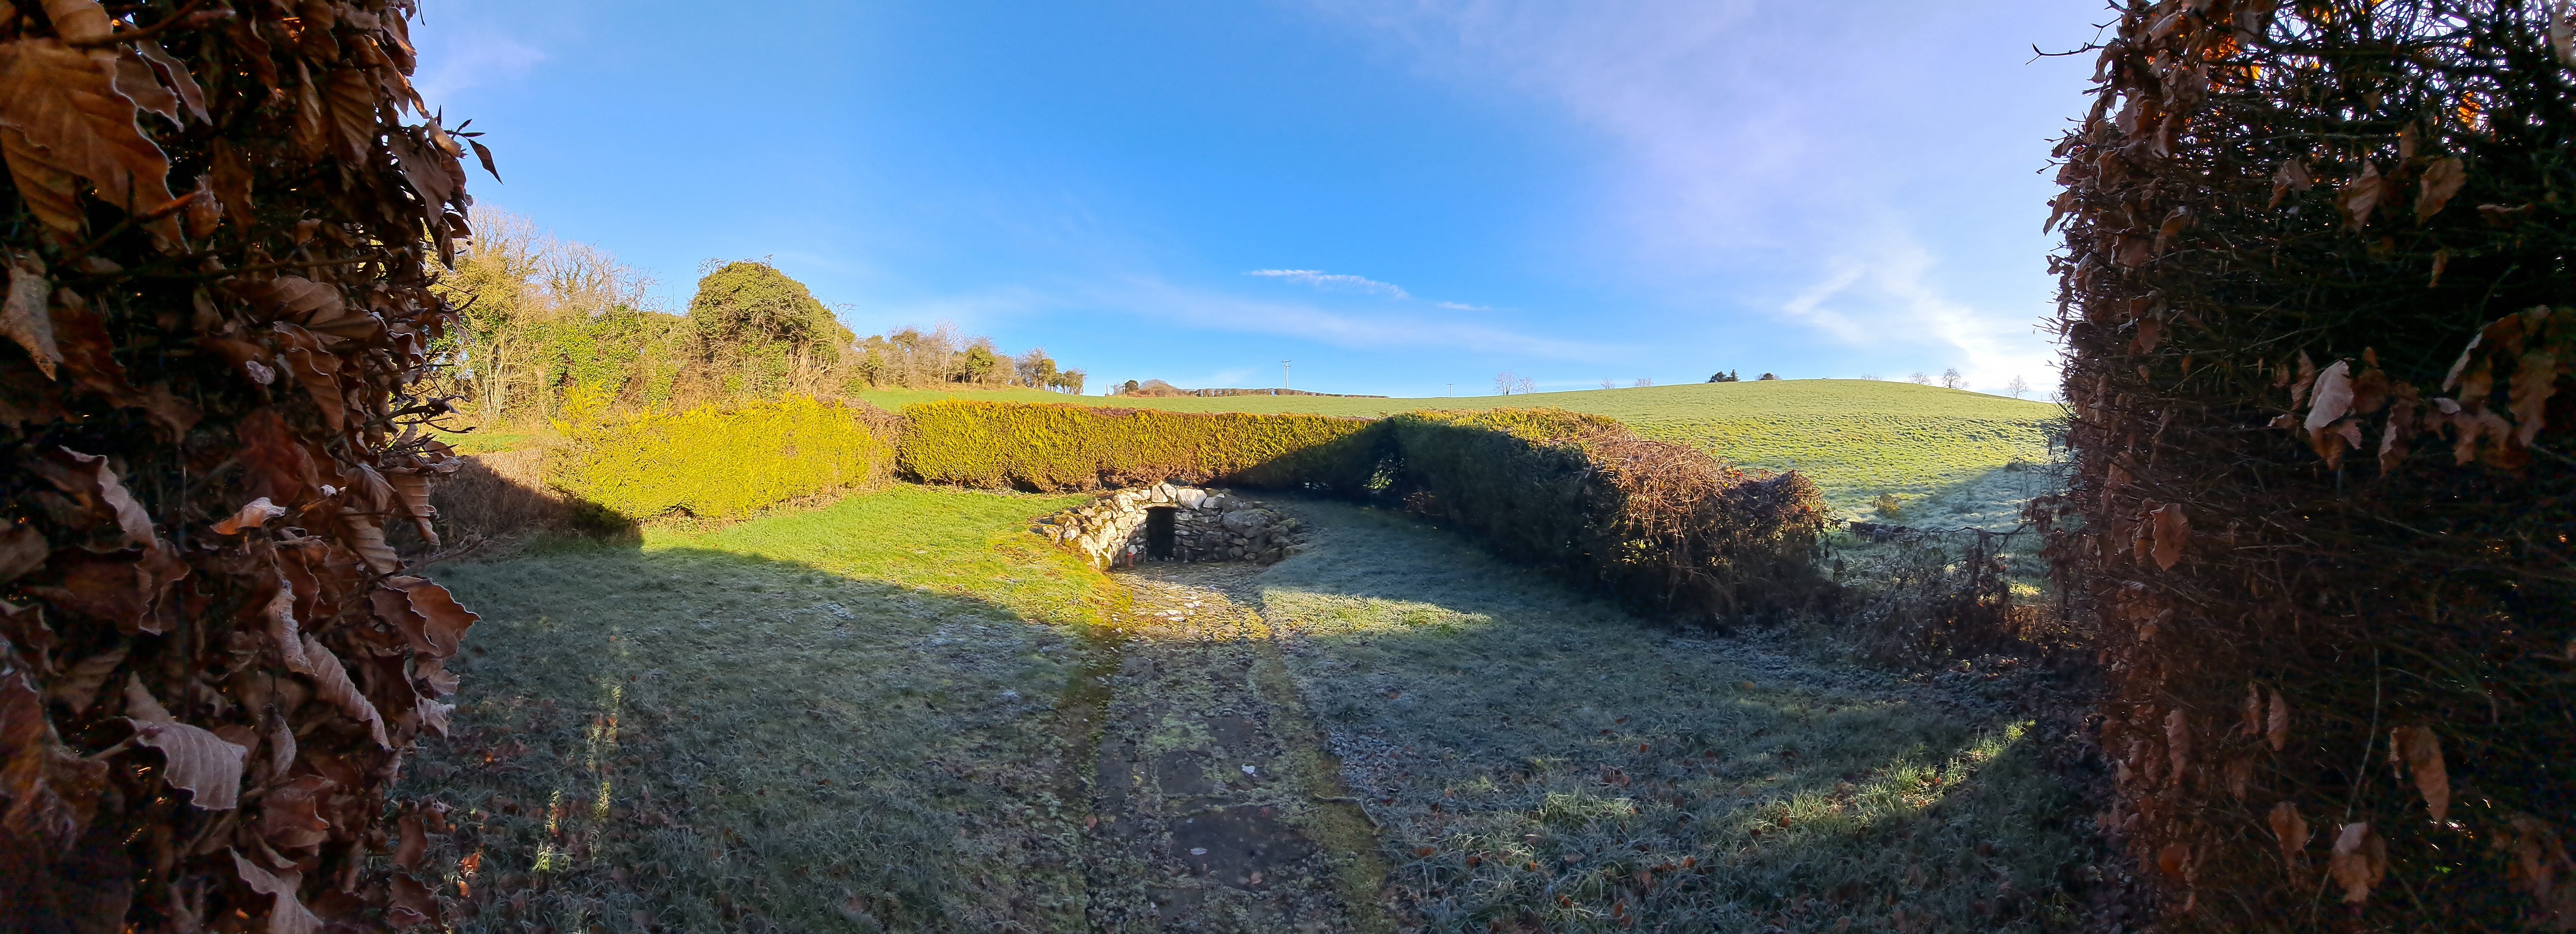 the arch of Brigid's well is glimpsed between a gab in the hedge, a flagged path leads up to the stone walled entrance, which is a small rectangular dark mouth. The site is enclsed by dense hedges, a lovely rolling meadow can be seen beyond, the sky is bright blue with some wispy clouds, there is frost on the grass.